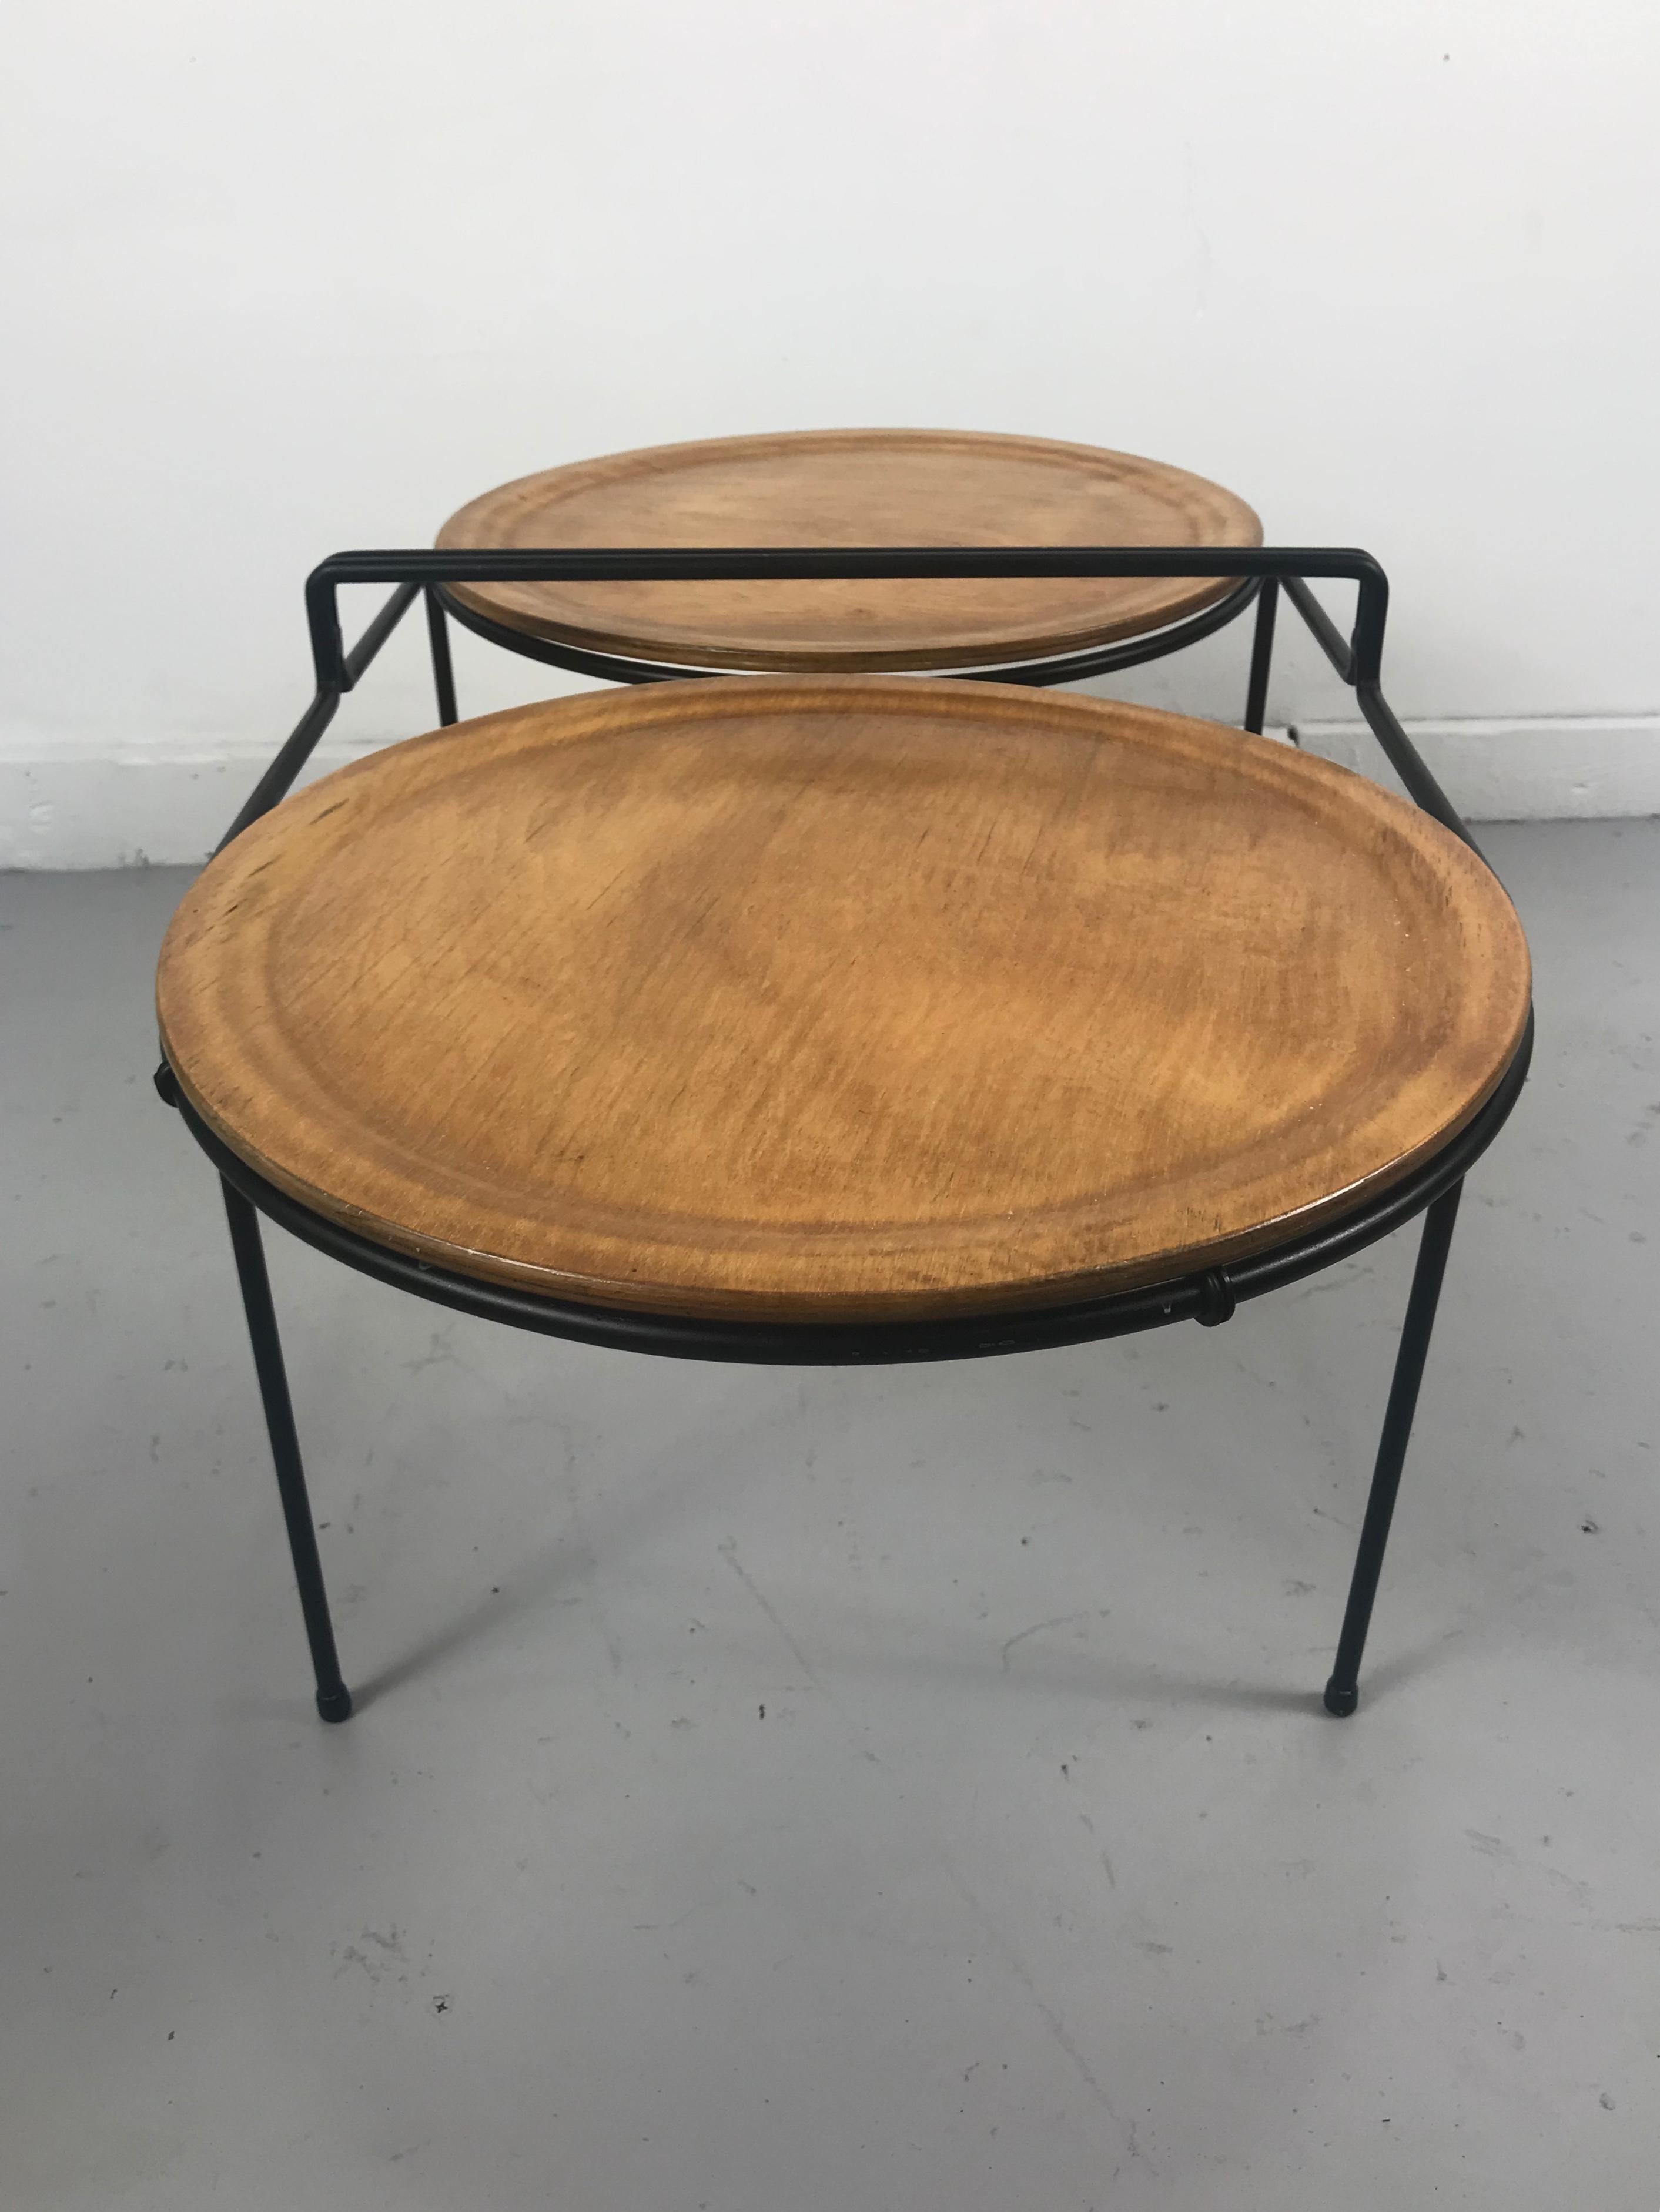 Rare and unusual Mid-Century Modern double cocktail tray table 